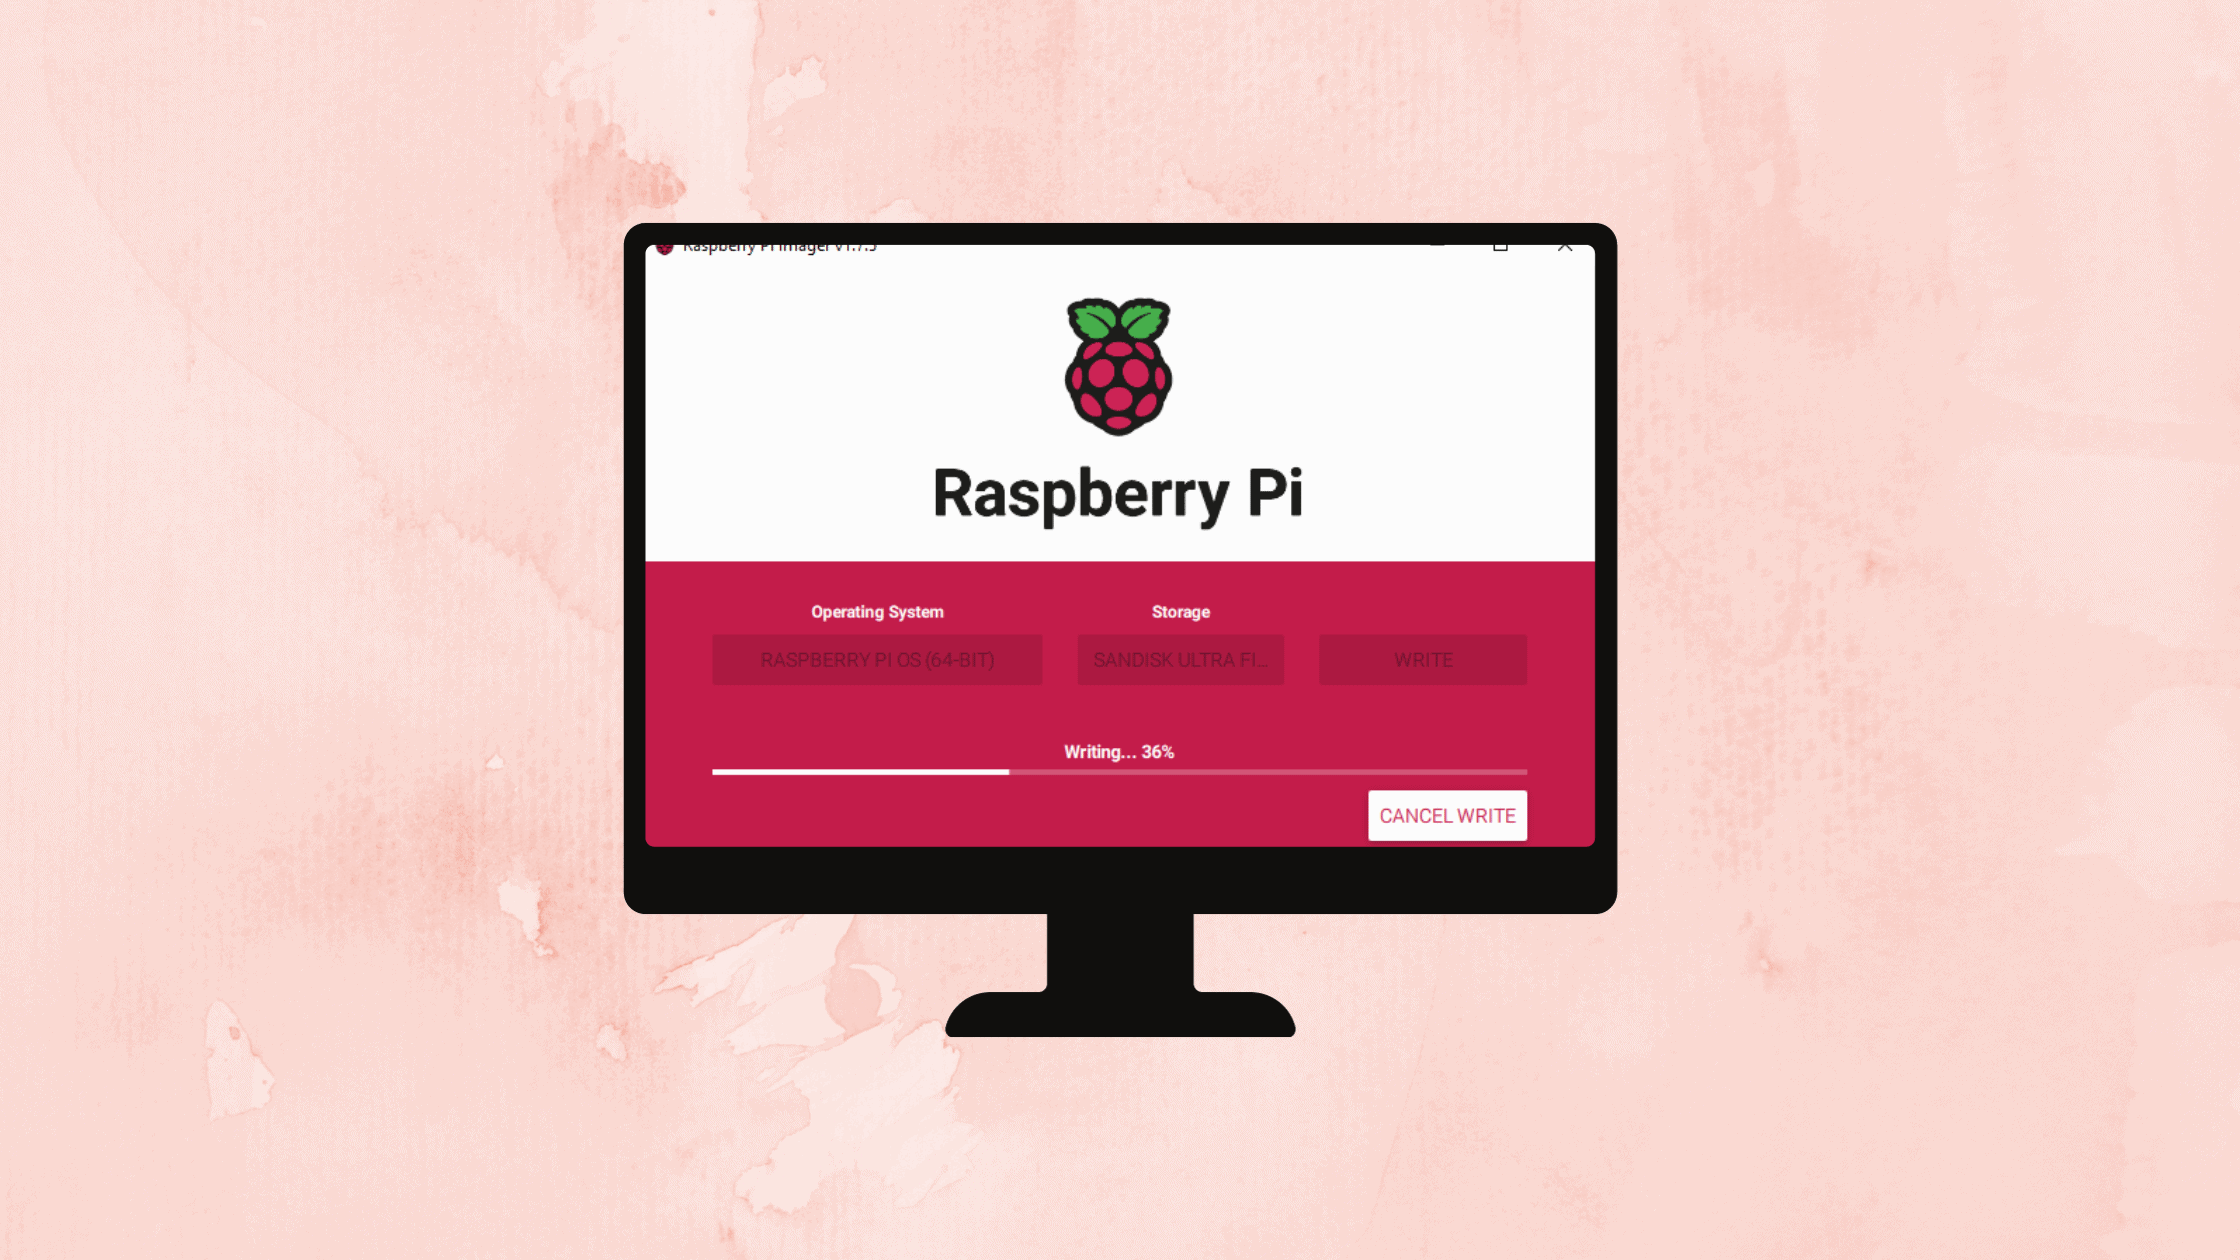 Step By Step Procedure To Write Os Image For Raspberry Pi